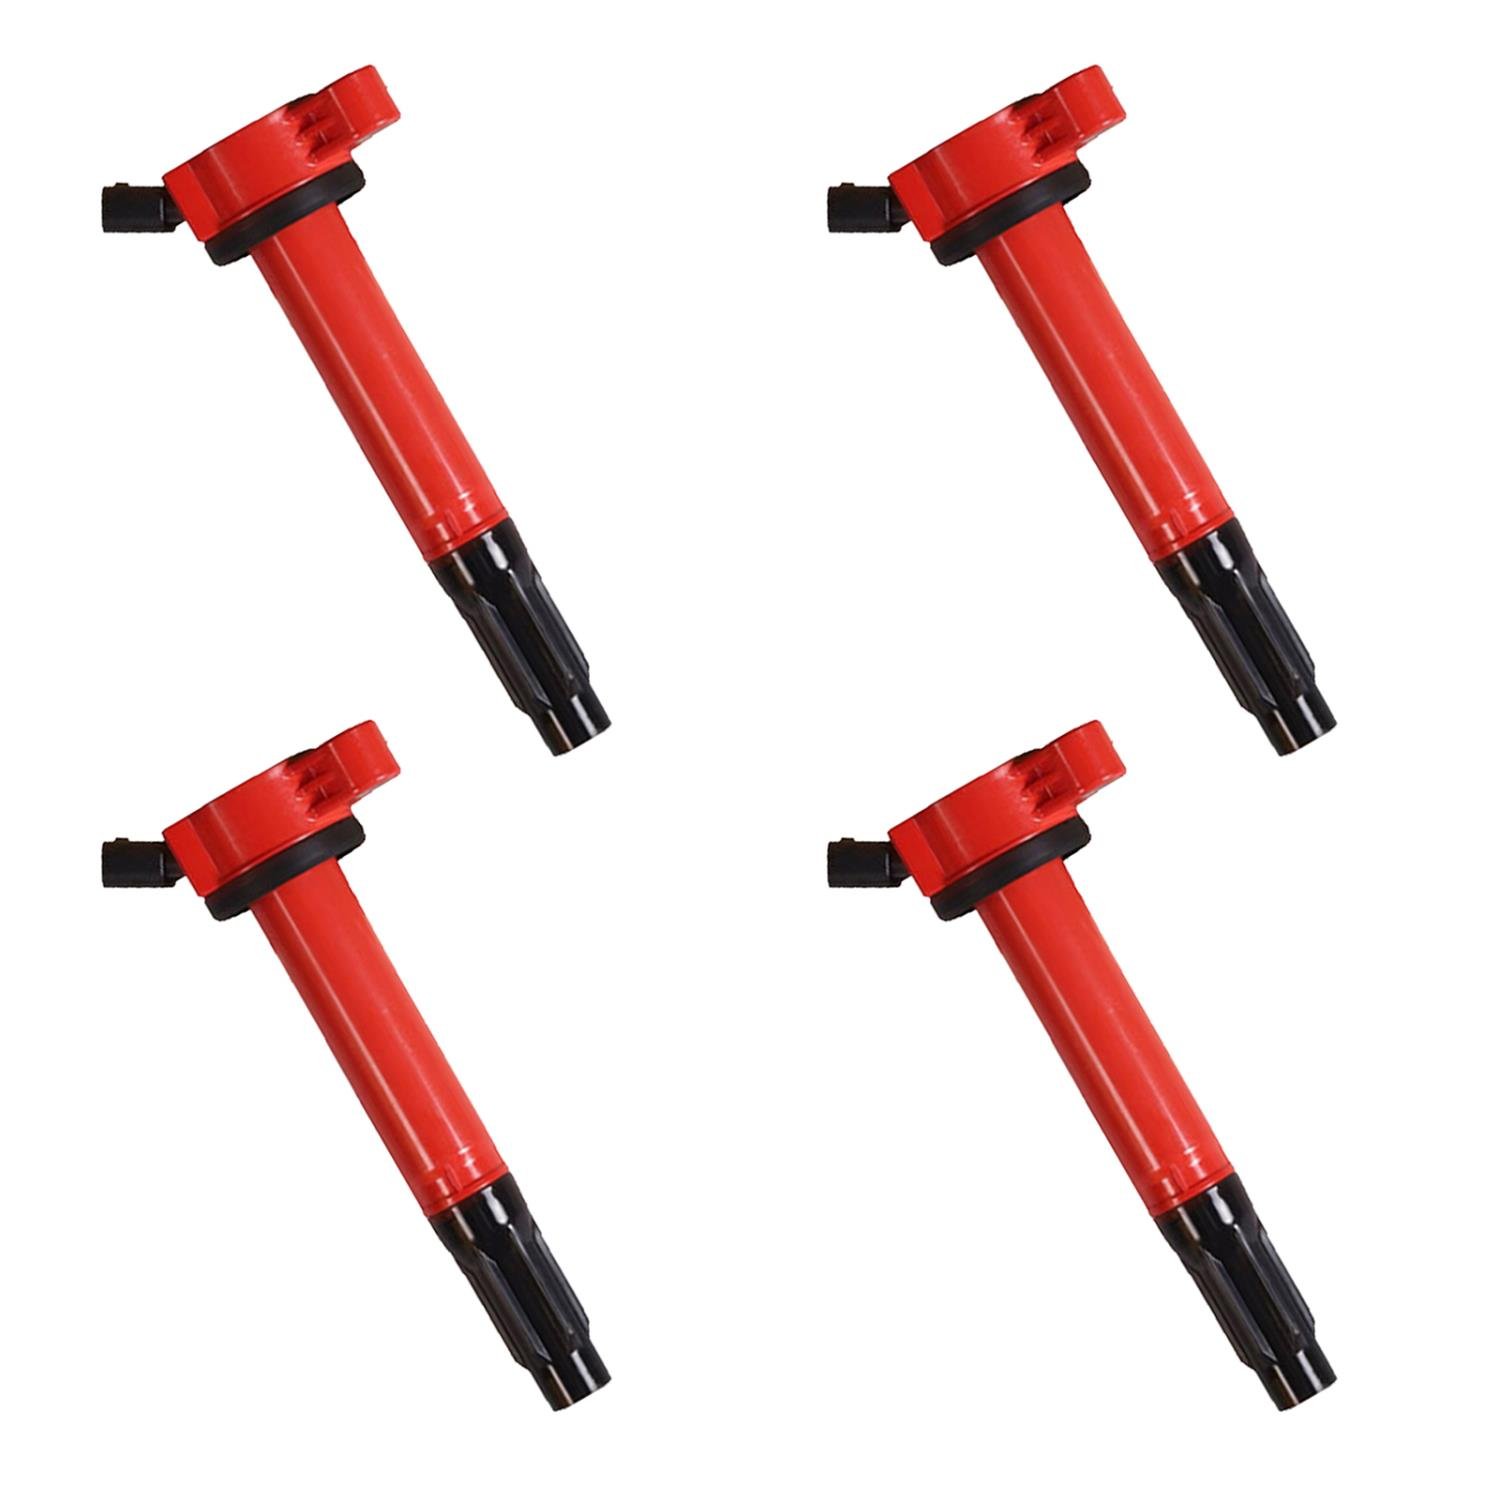 High-Performance Ignition Coils for Toyota Camry/RAV4 [Red]